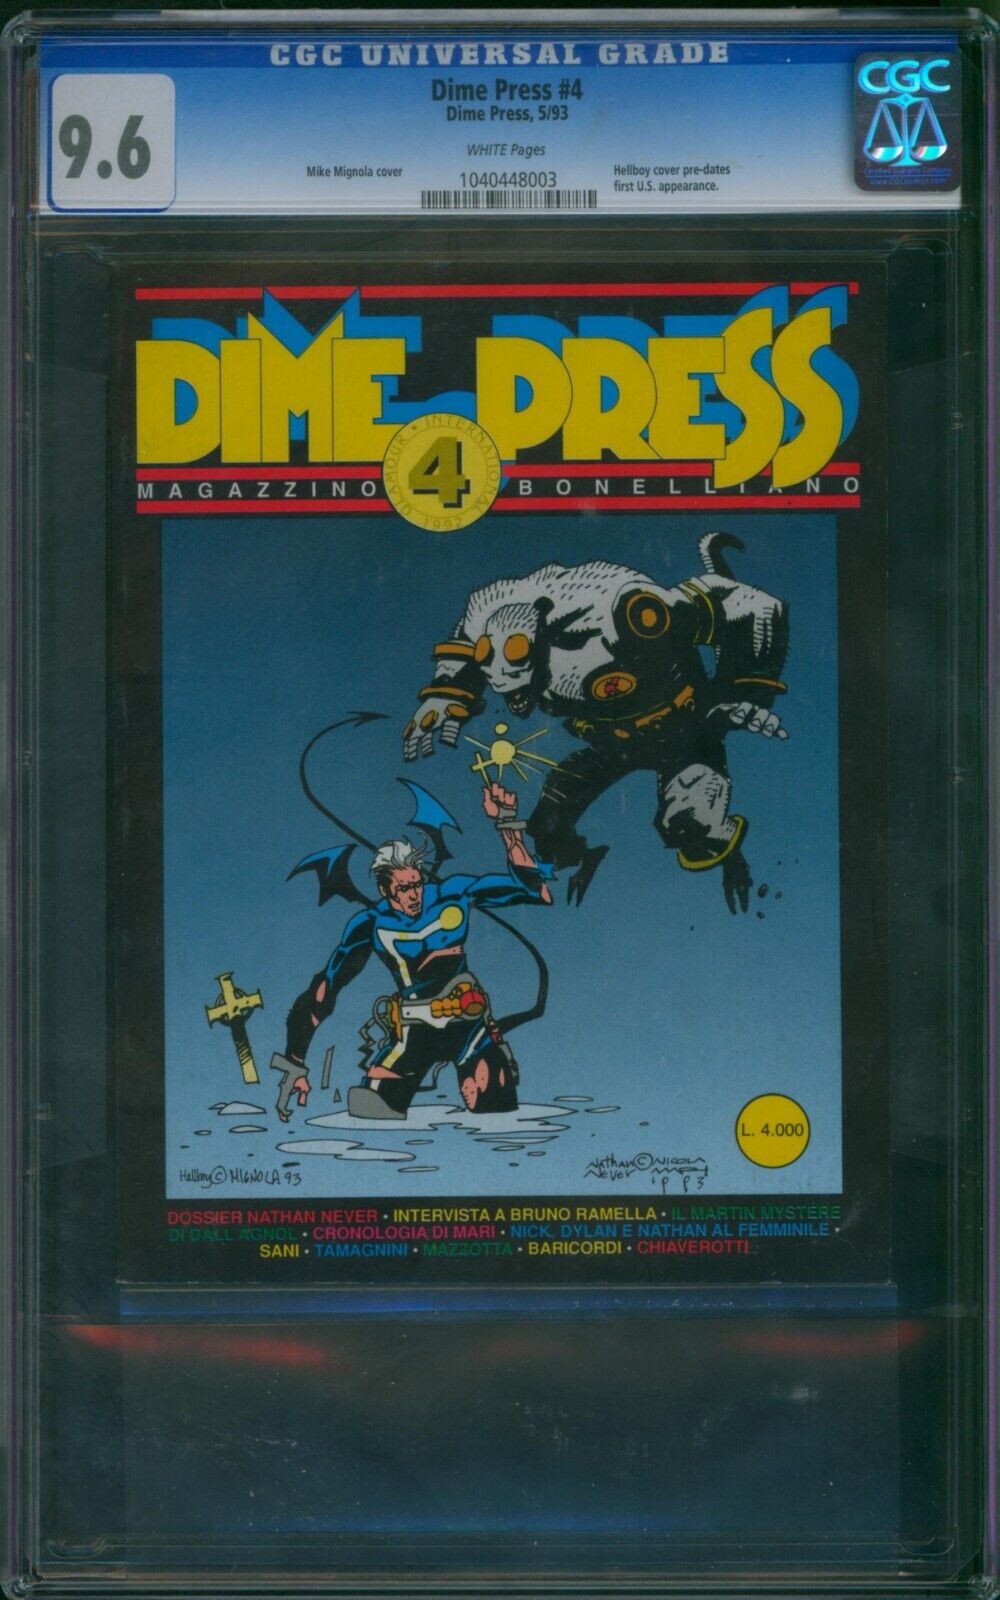 Dime Press #4 ⭐ CGC 9.6 ⭐ ONLY 4 HIGHER 1st Hellboy Cover Pre-Dates US 1993